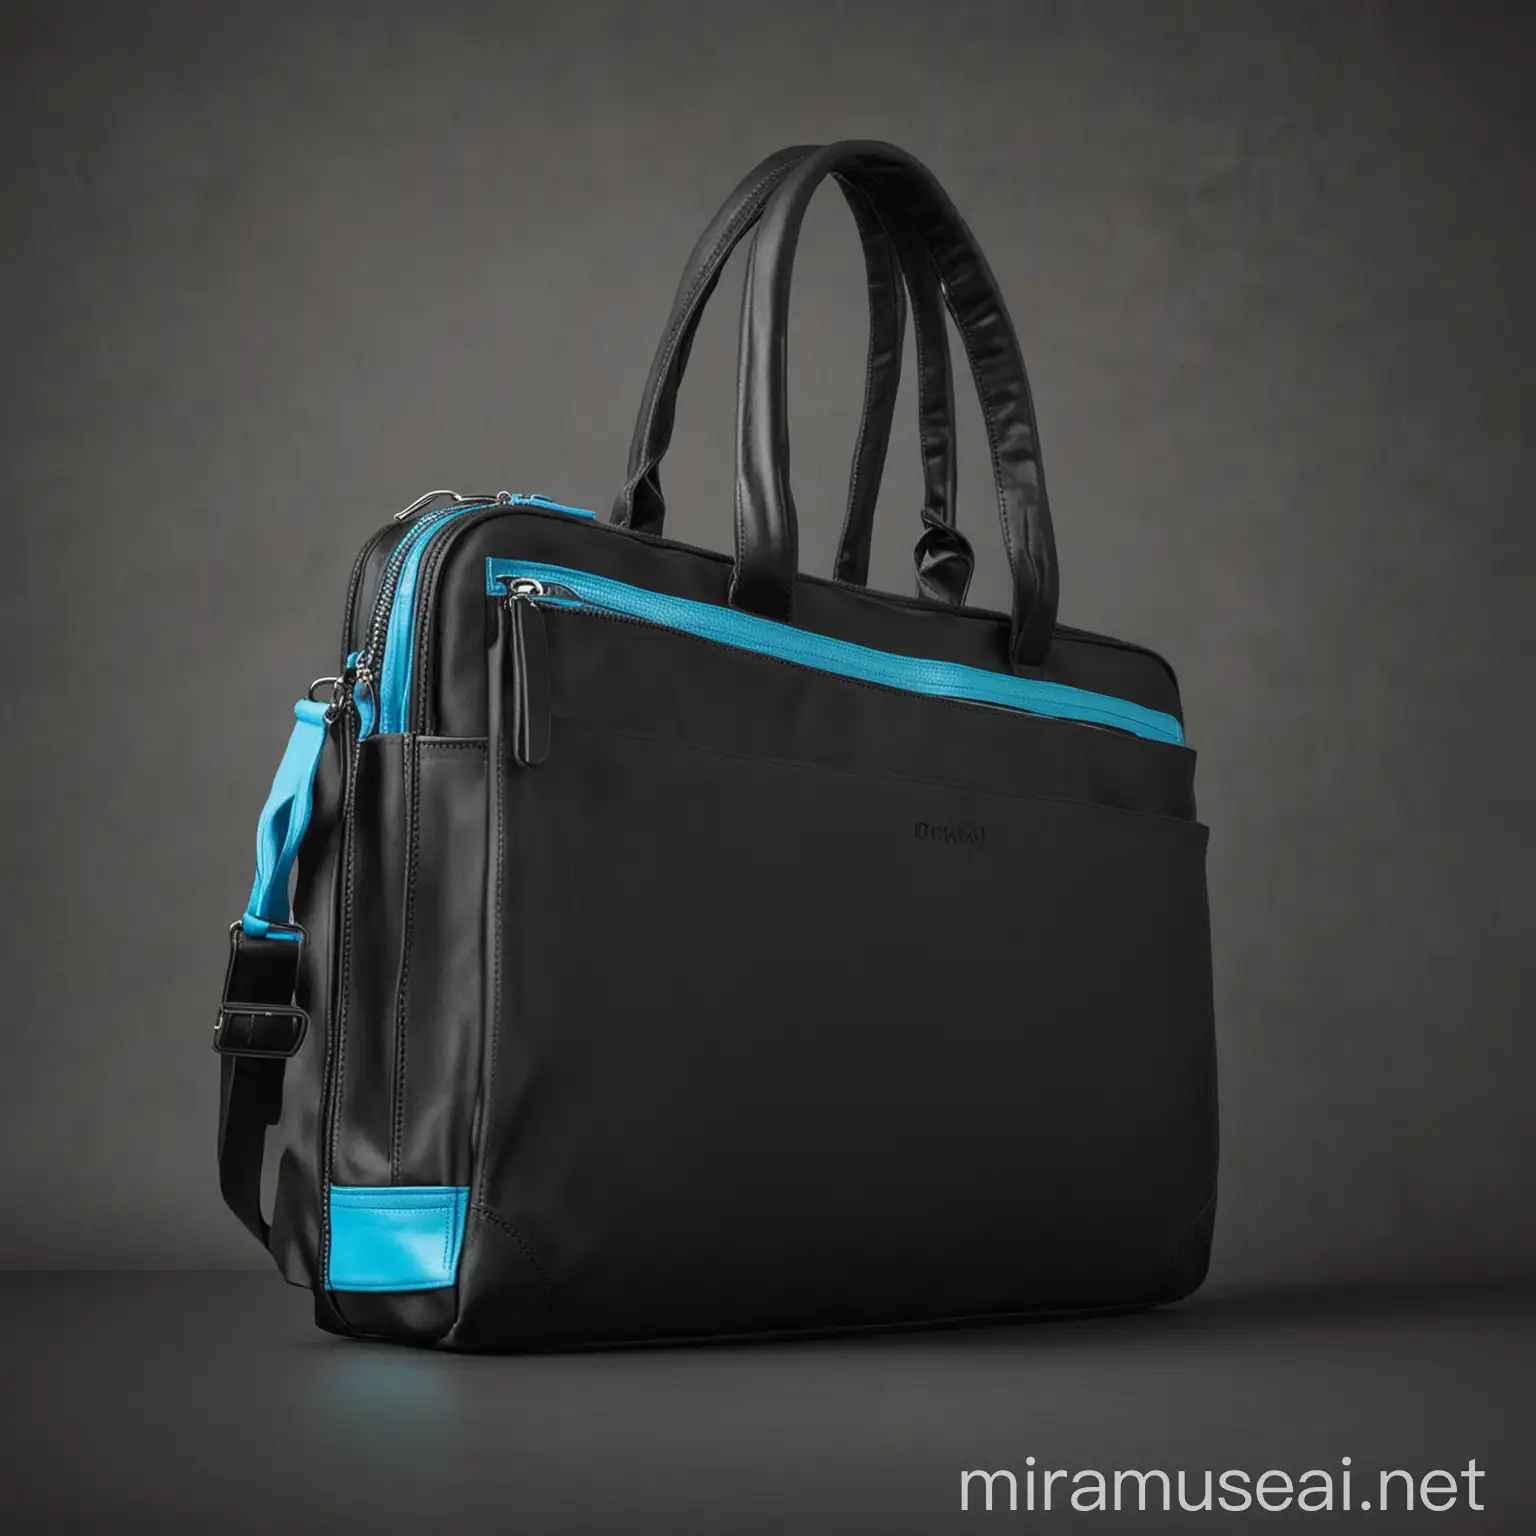 Modern Black Laptop Bag with Cerulean Accents in Office Setting